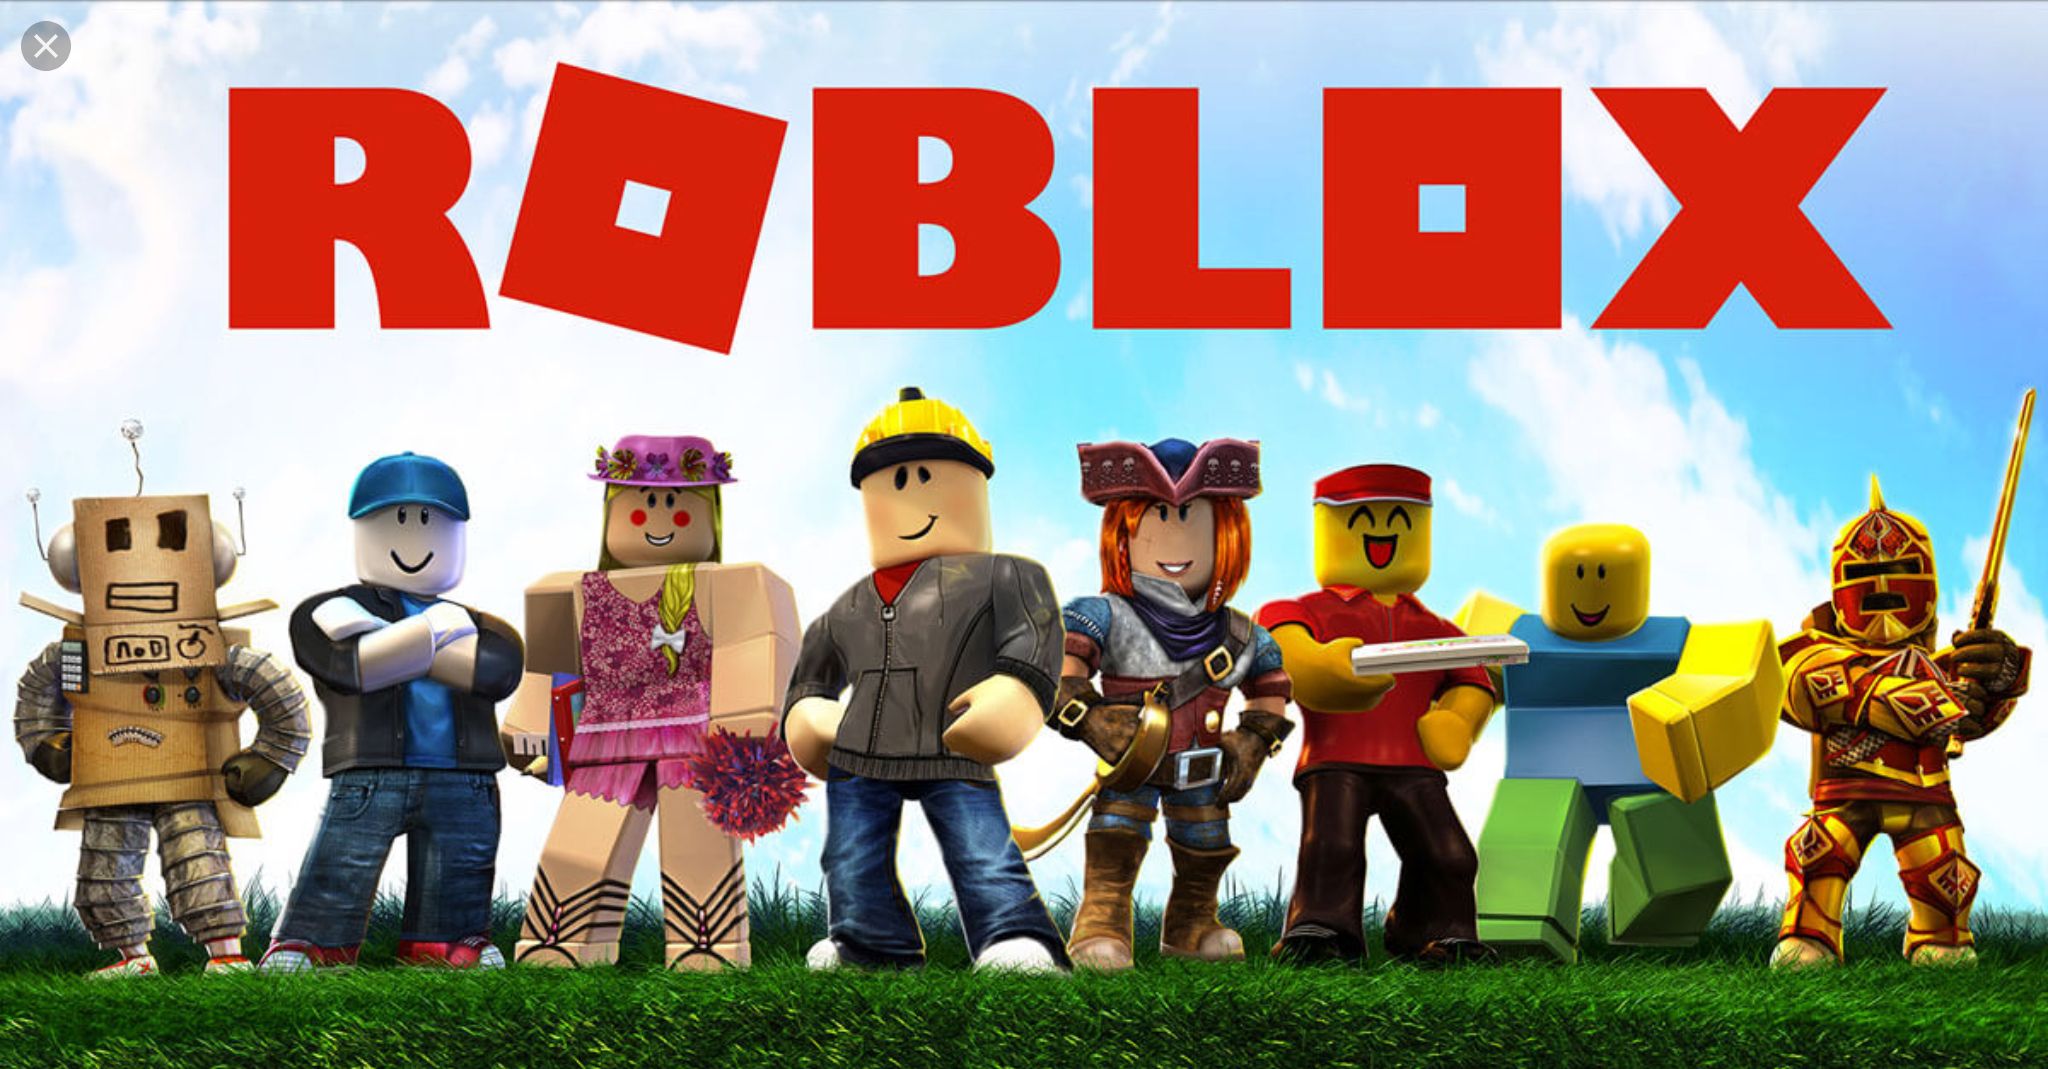 The hd wallpaper picture (Xlr Roblox) has been downloaded. Explore more  other HD wallpaper you like on Wallpa…